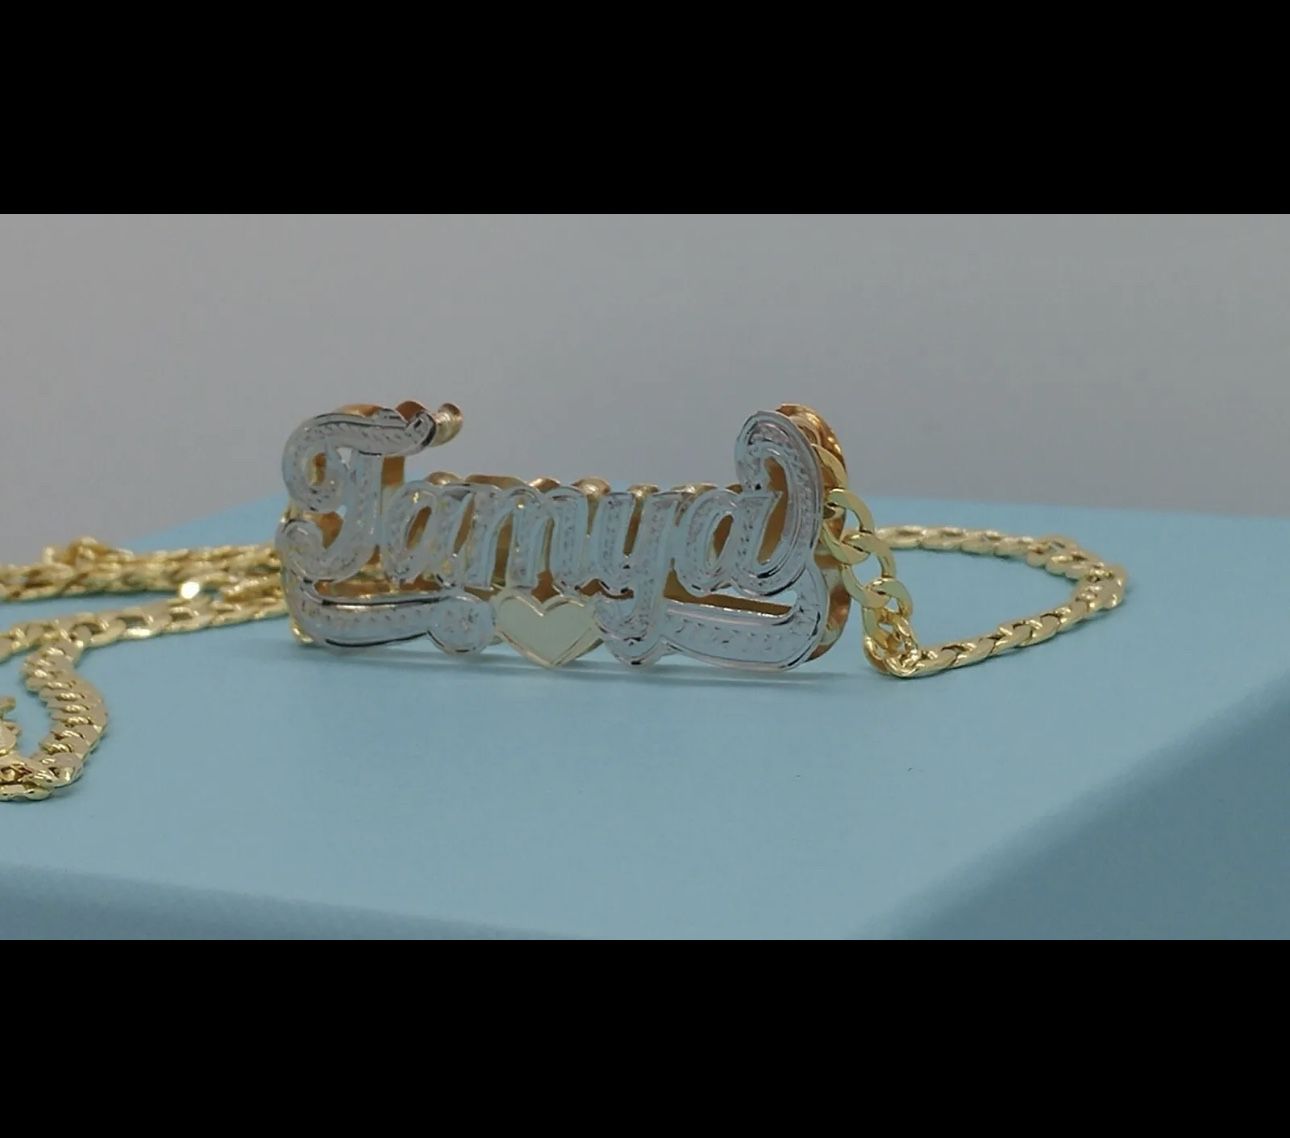 10k Or 14k Gold Double Name Plate Necklace With Chain